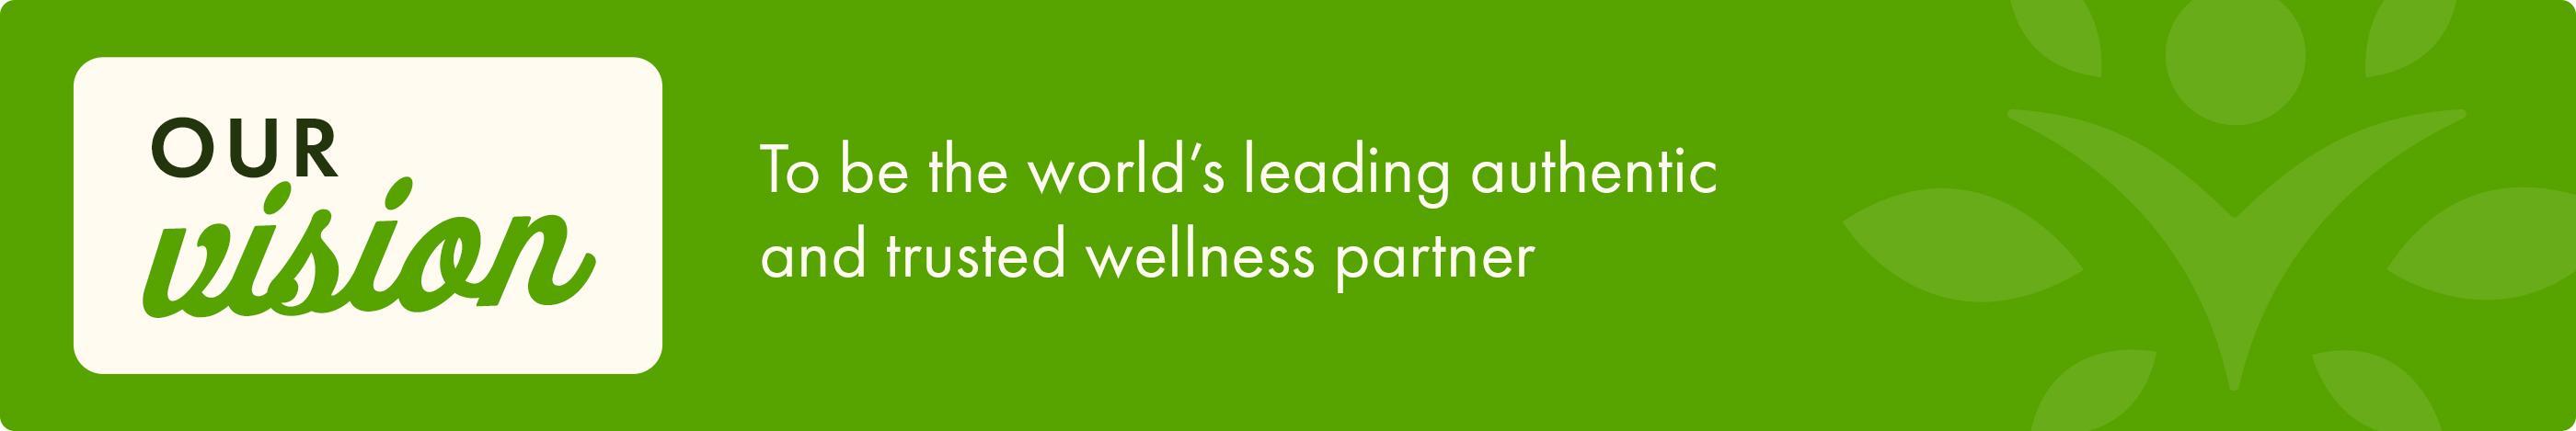 Our Vision - To be the world’s leading authenticand trusted wellness partner